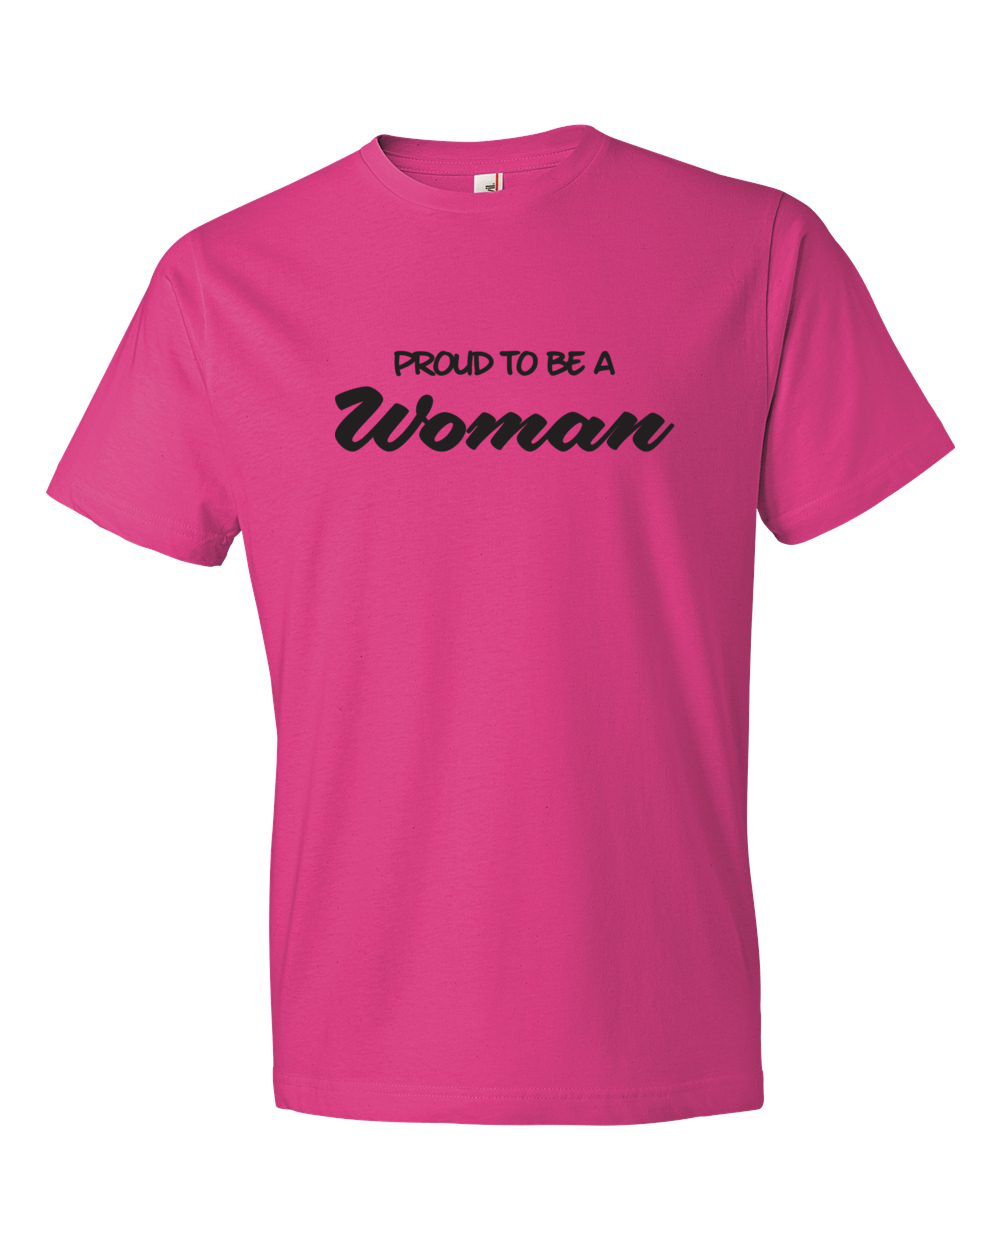 Proud to be a Woman - Woman